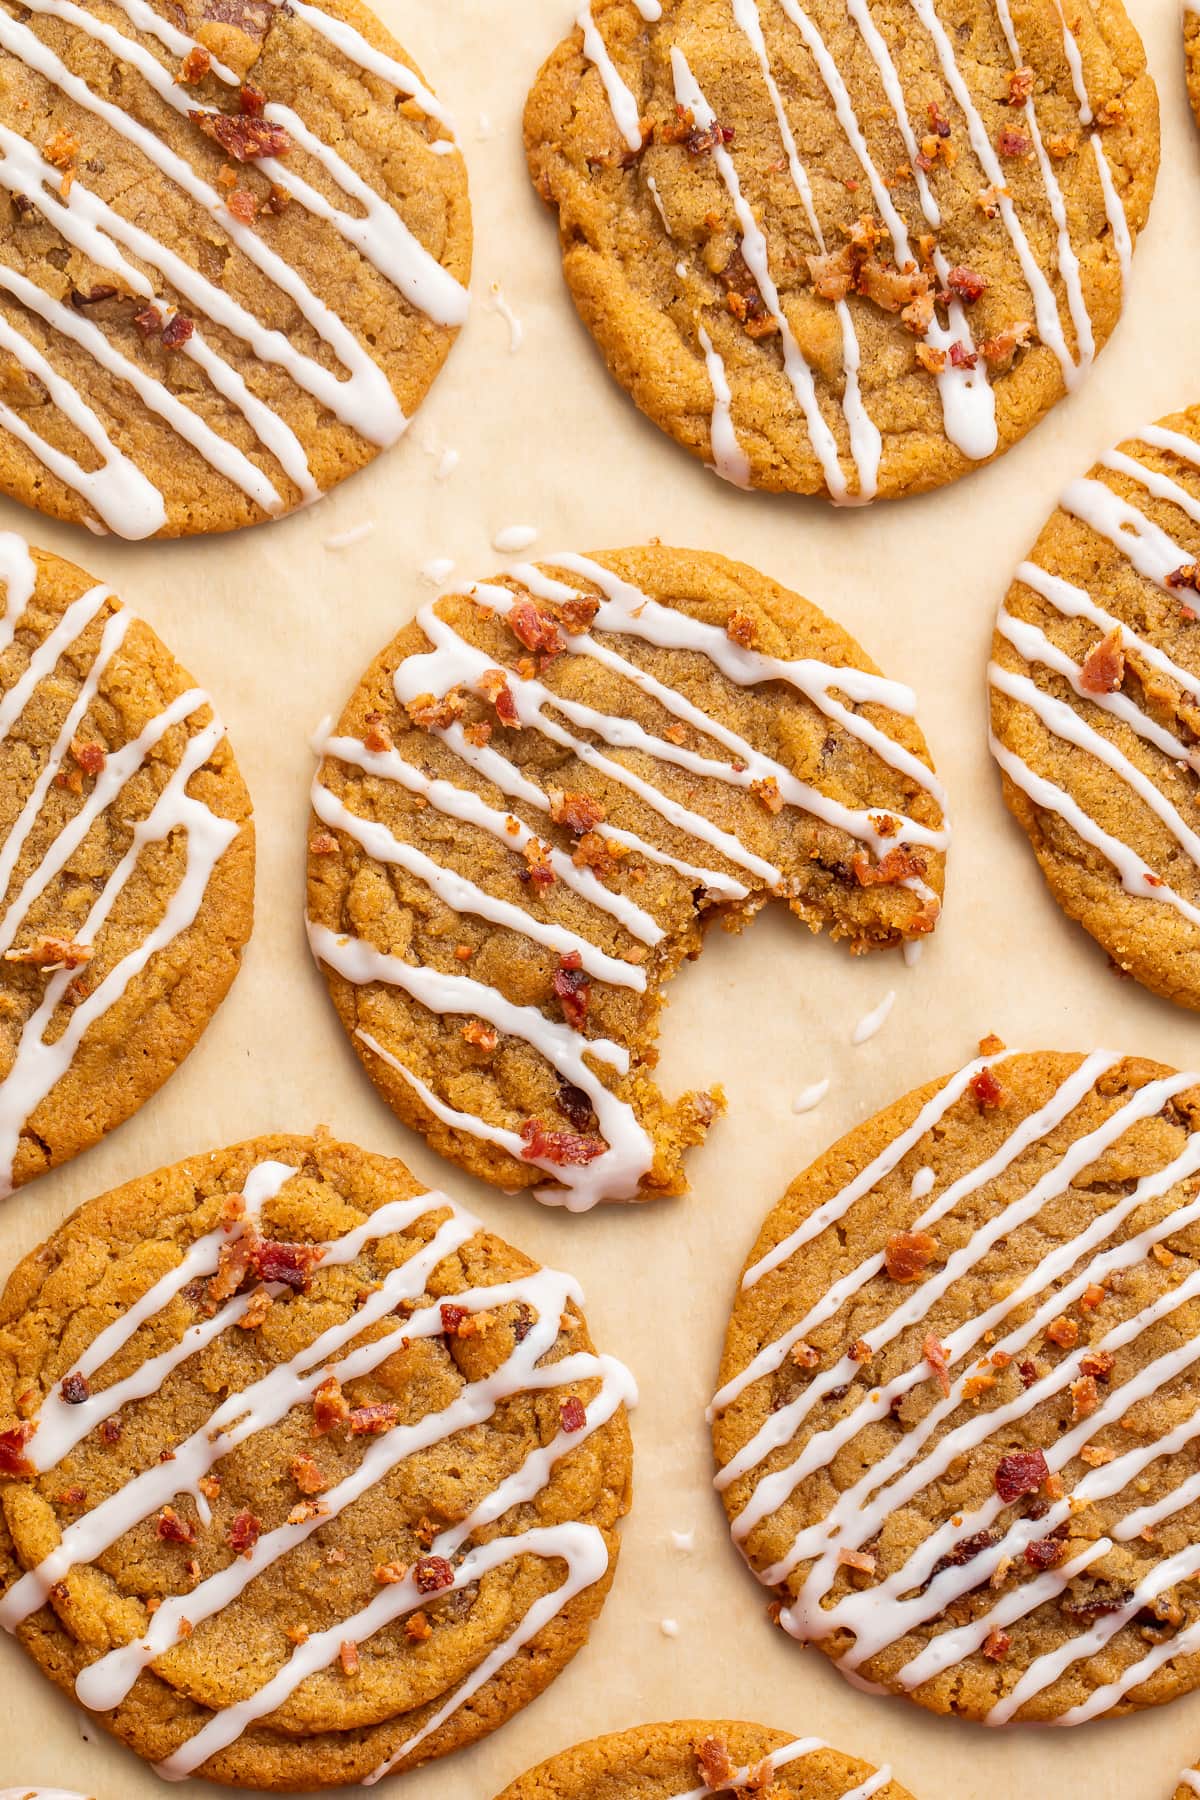 Bacon cookie butter cookies with a cinnamon glaze drizzle arranged on parchment paper.